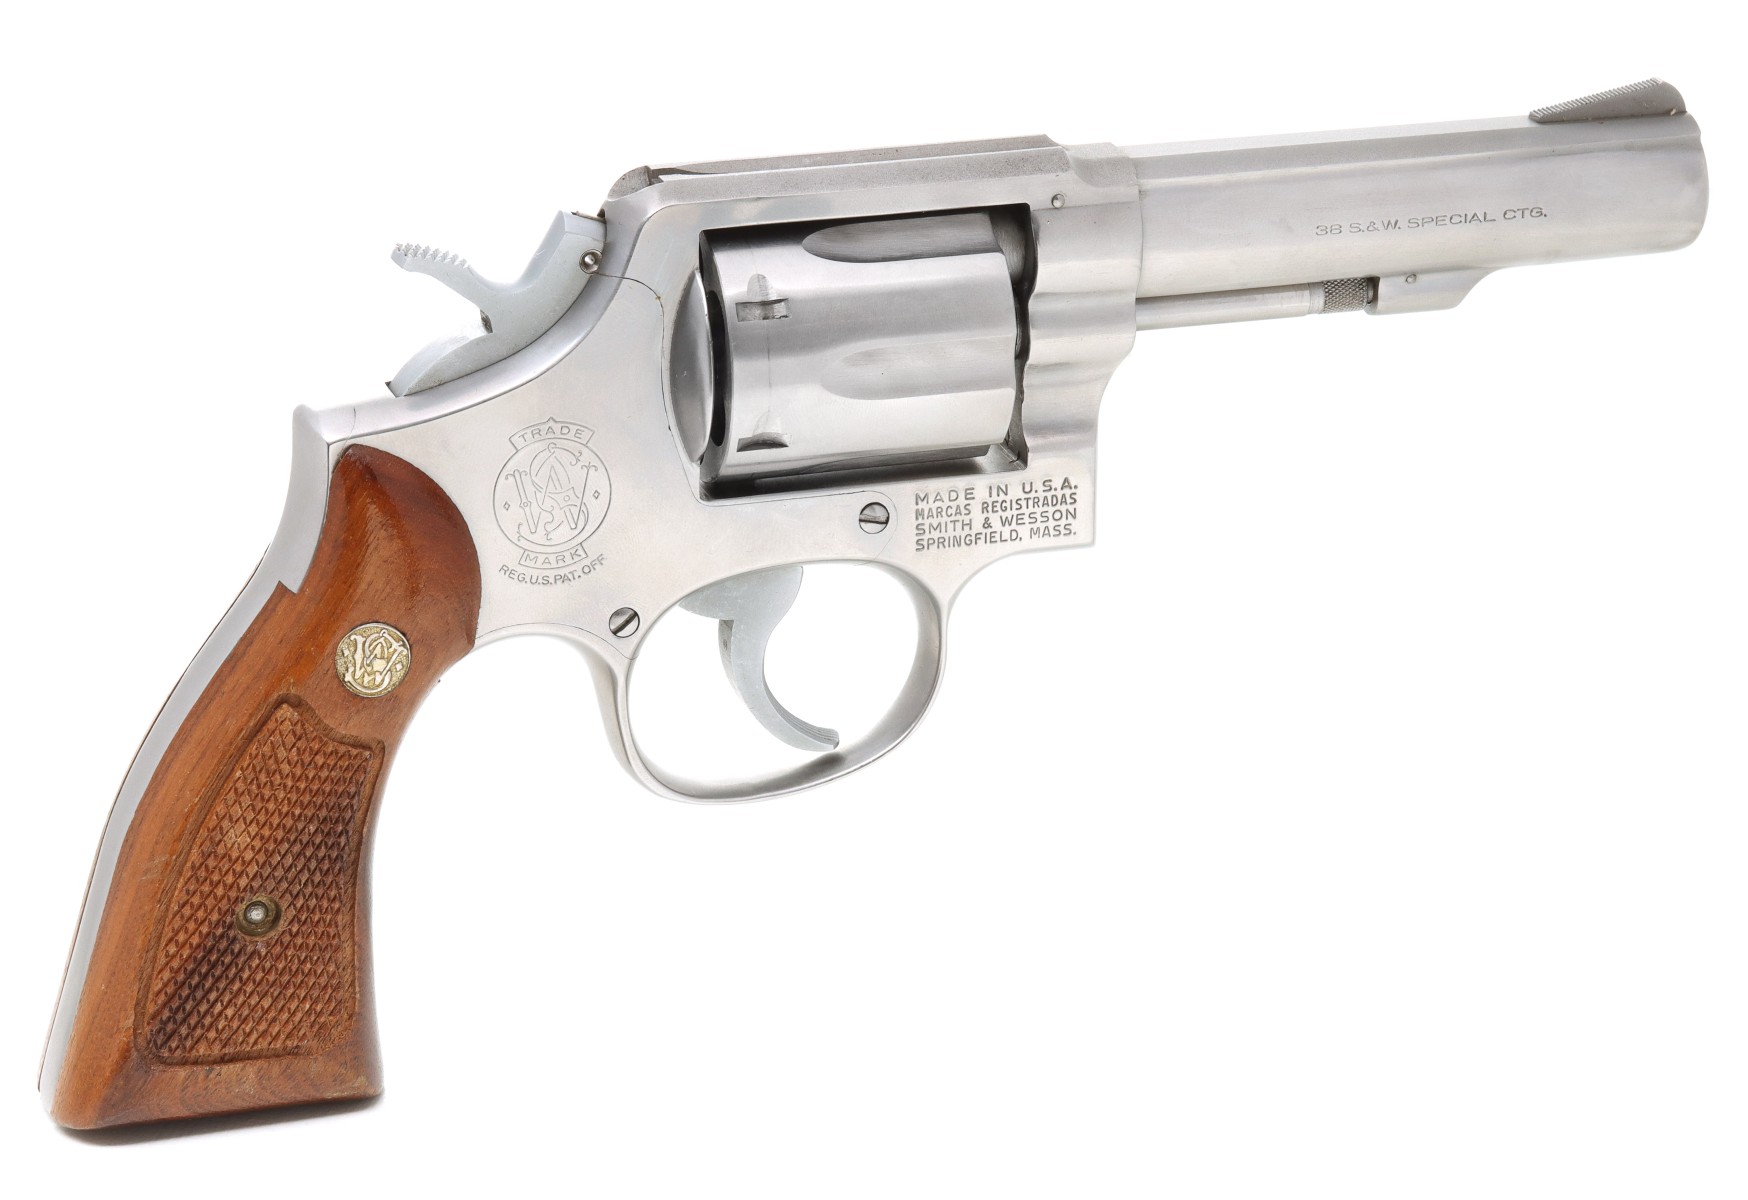 4-a-boxed-stainless-steel-smith-wesson-38-cal-revolver